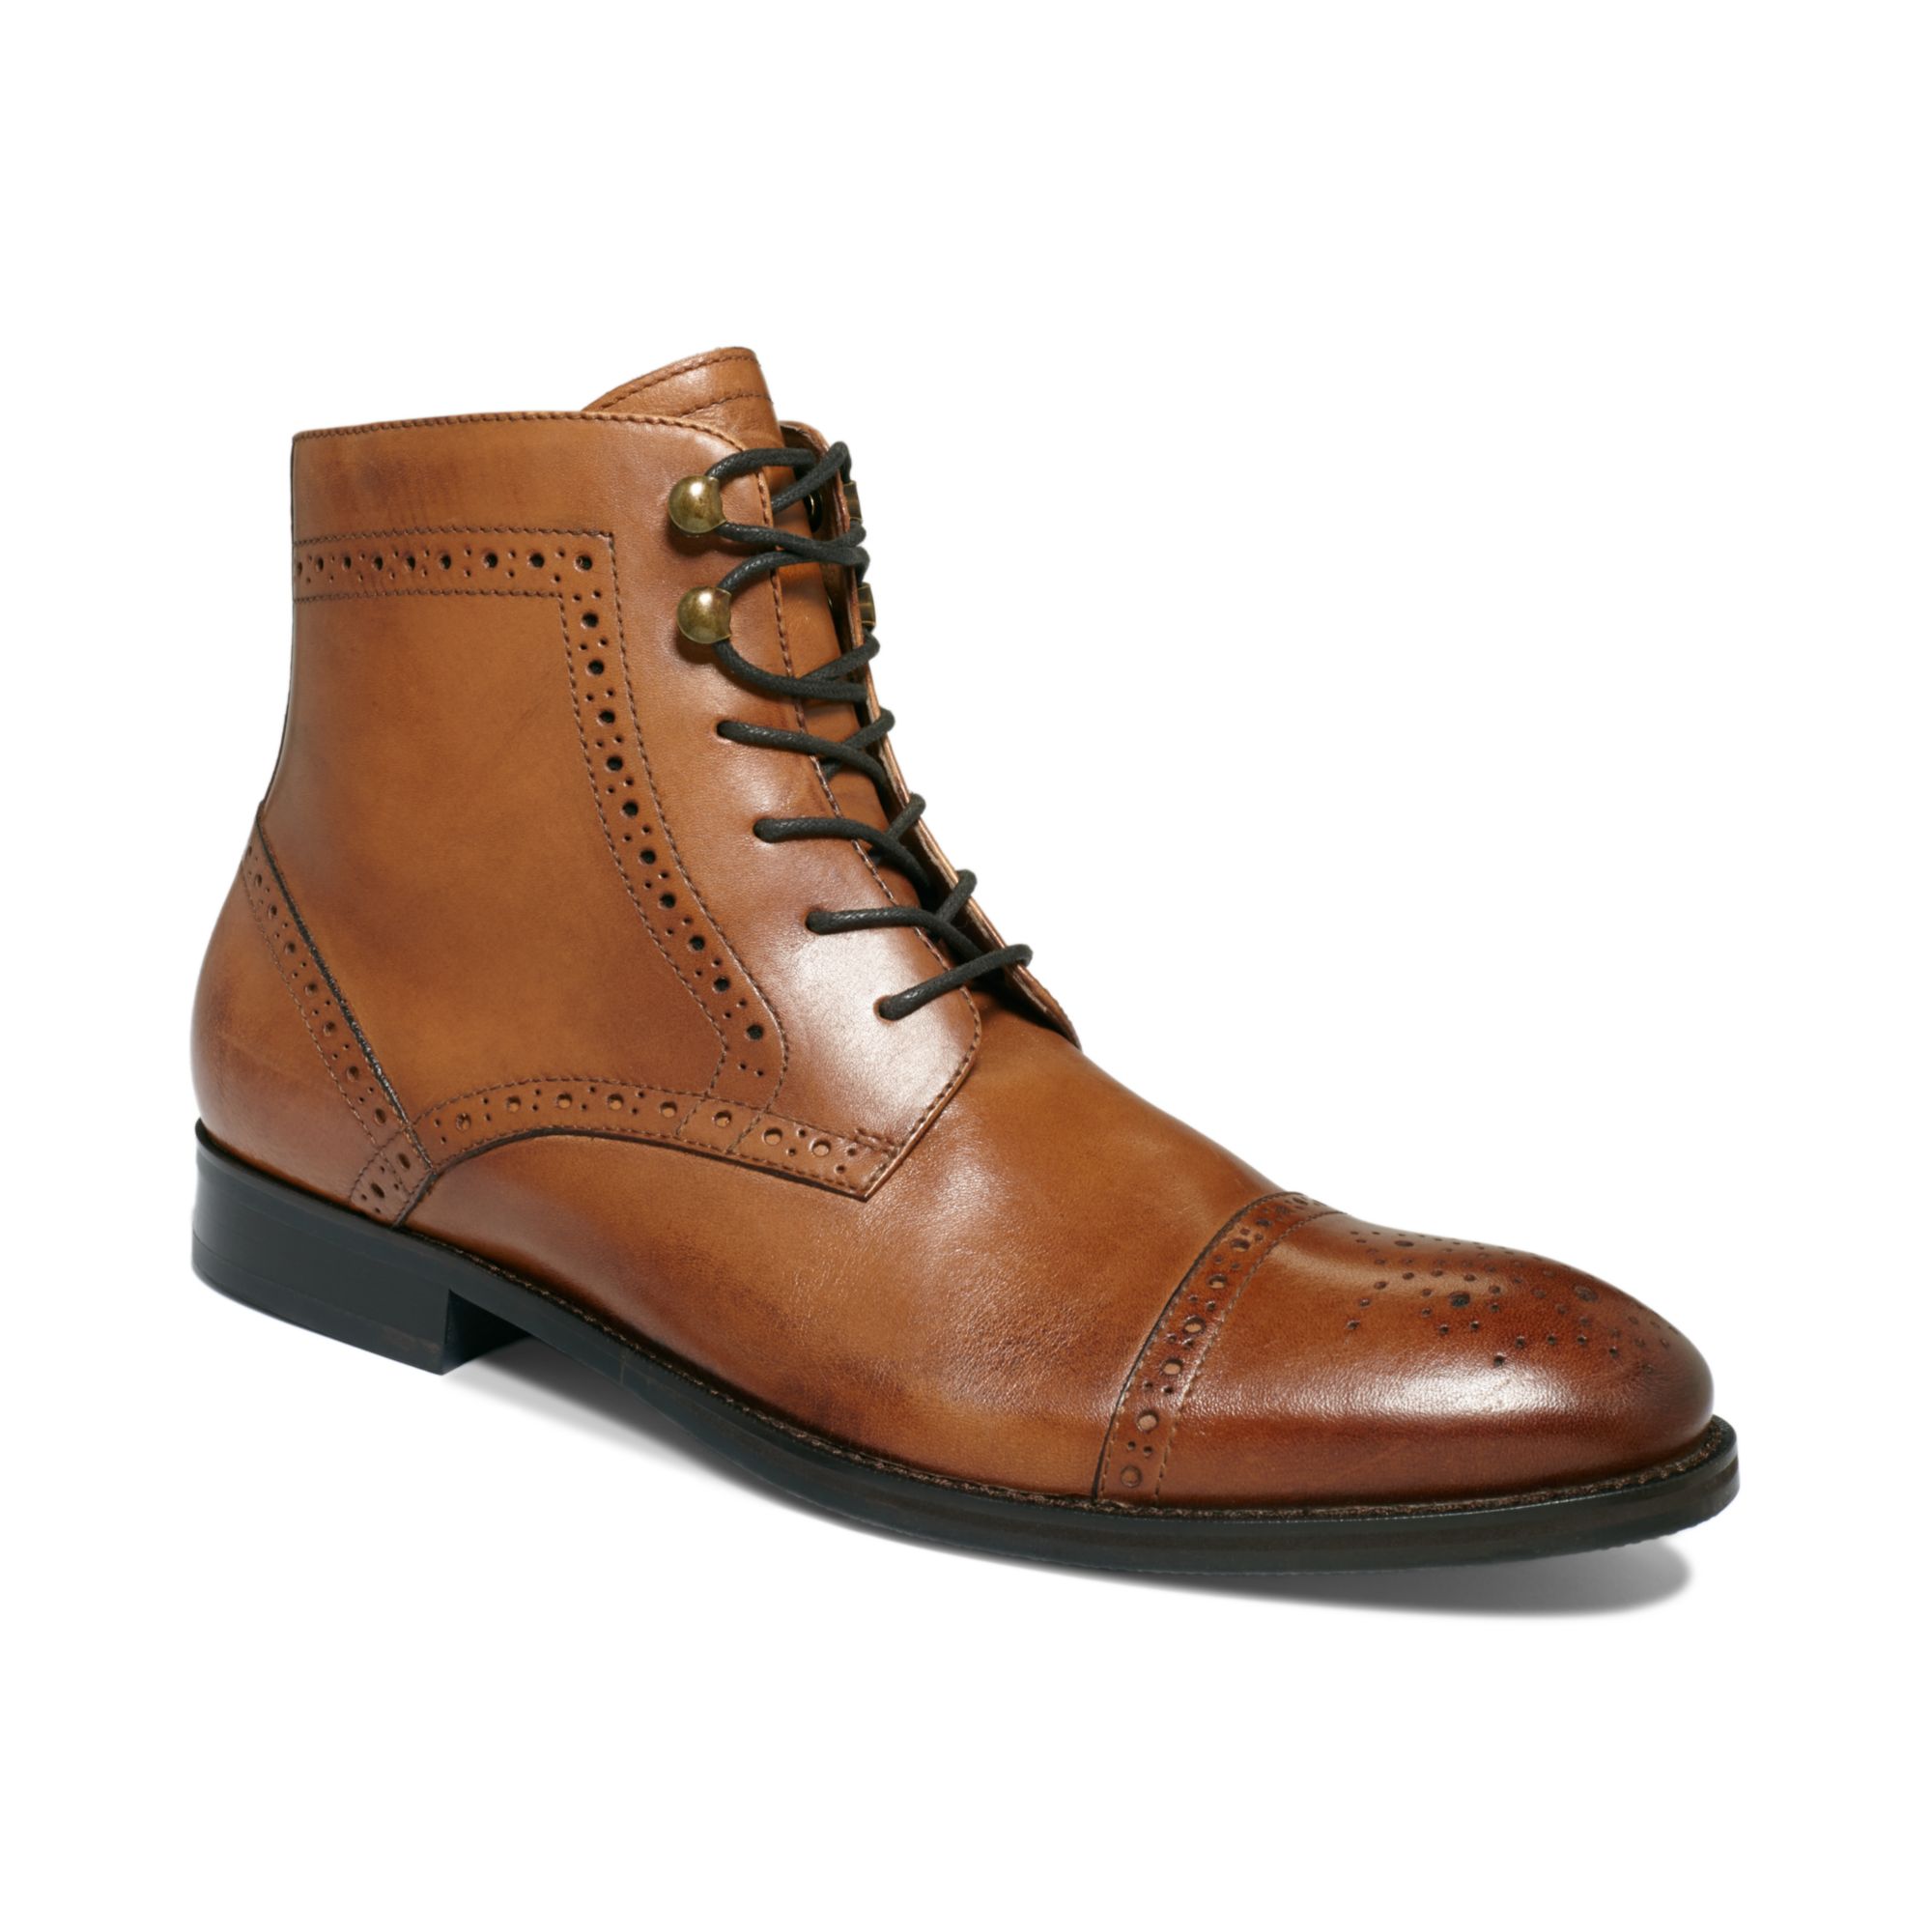 Johnston & Murphy Tyndall Captoe Lace Boots in Tan (Brown) for Men - Lyst